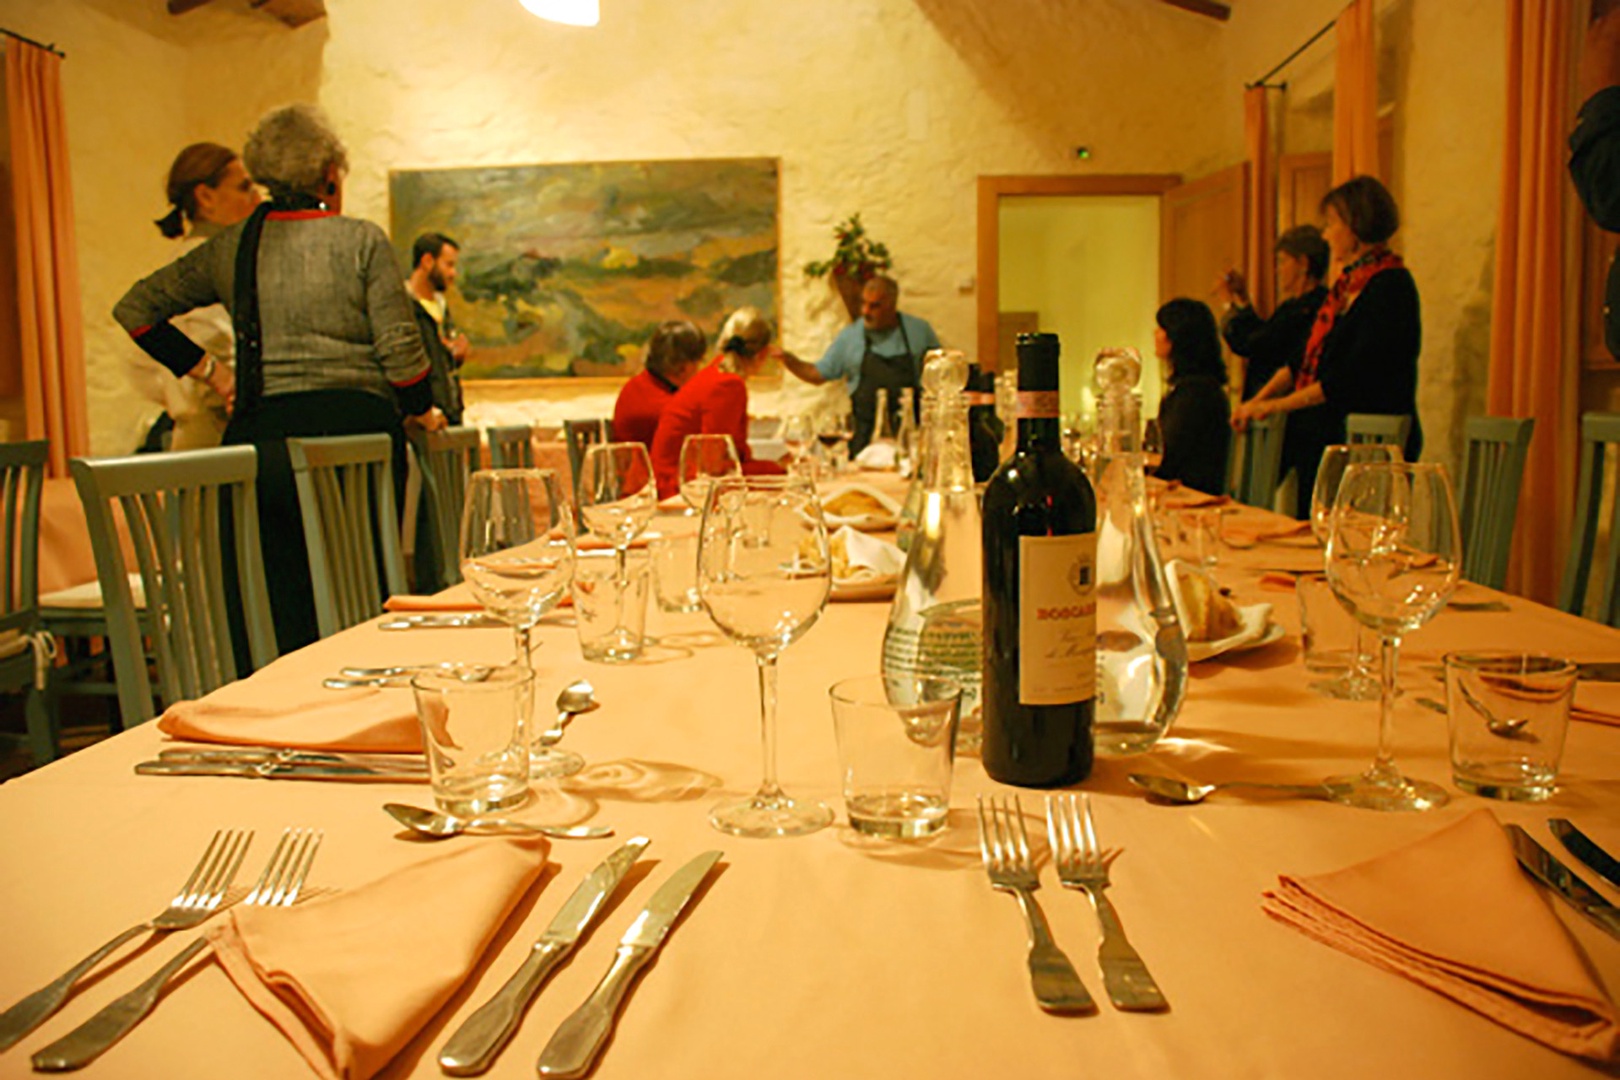 Group dinners can be arranged for large families/friends.